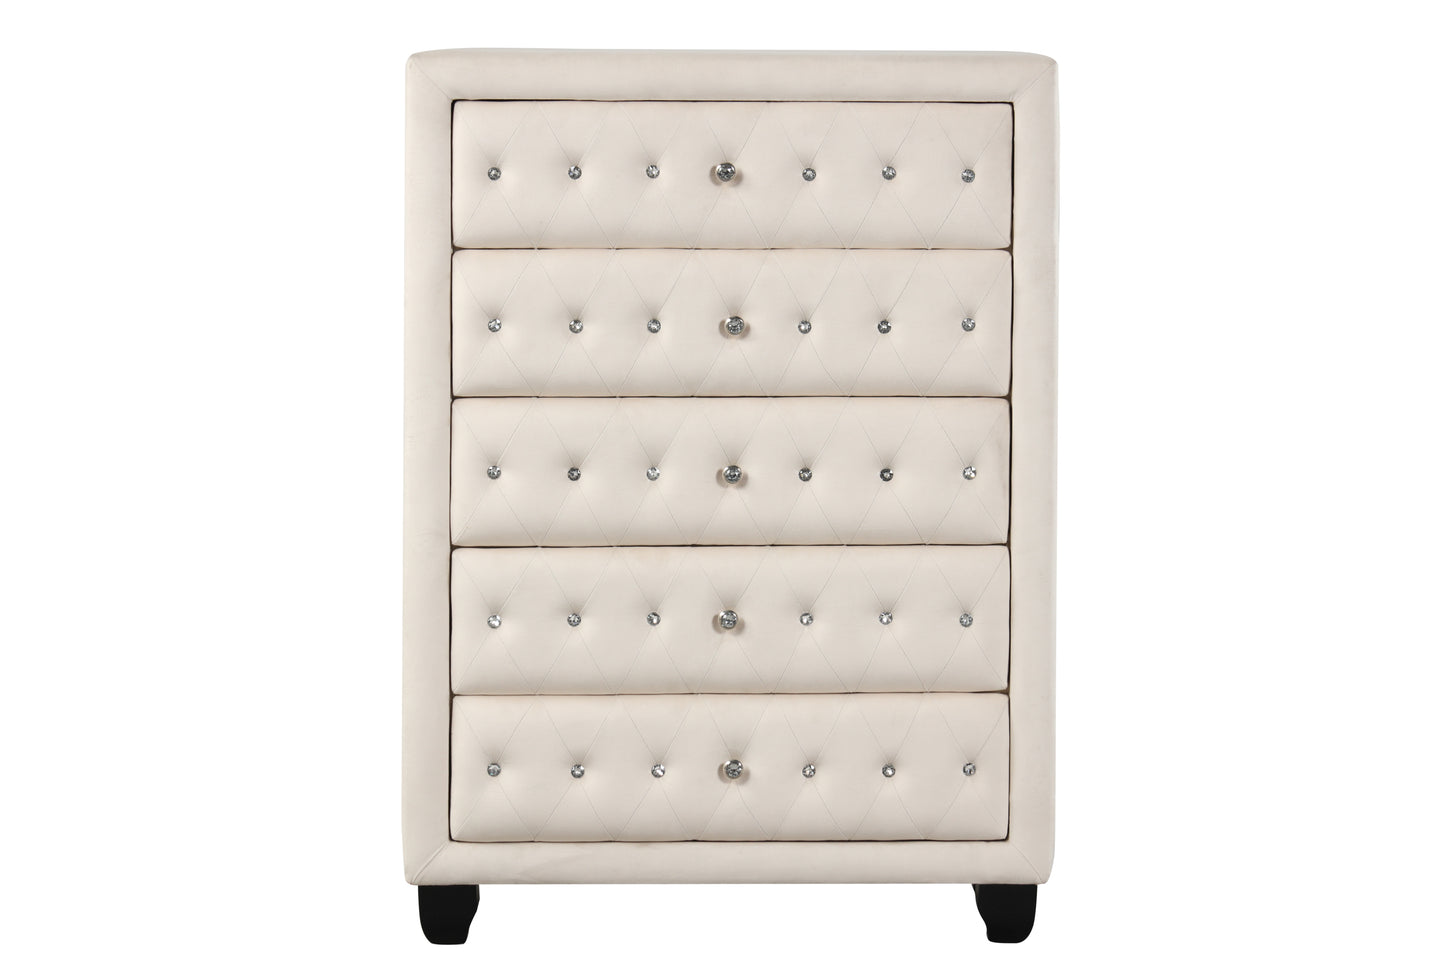 Sophia Crystal Tufted Full 5 Pc Bed Made with Wood in Cream - Enova Luxe Home Store